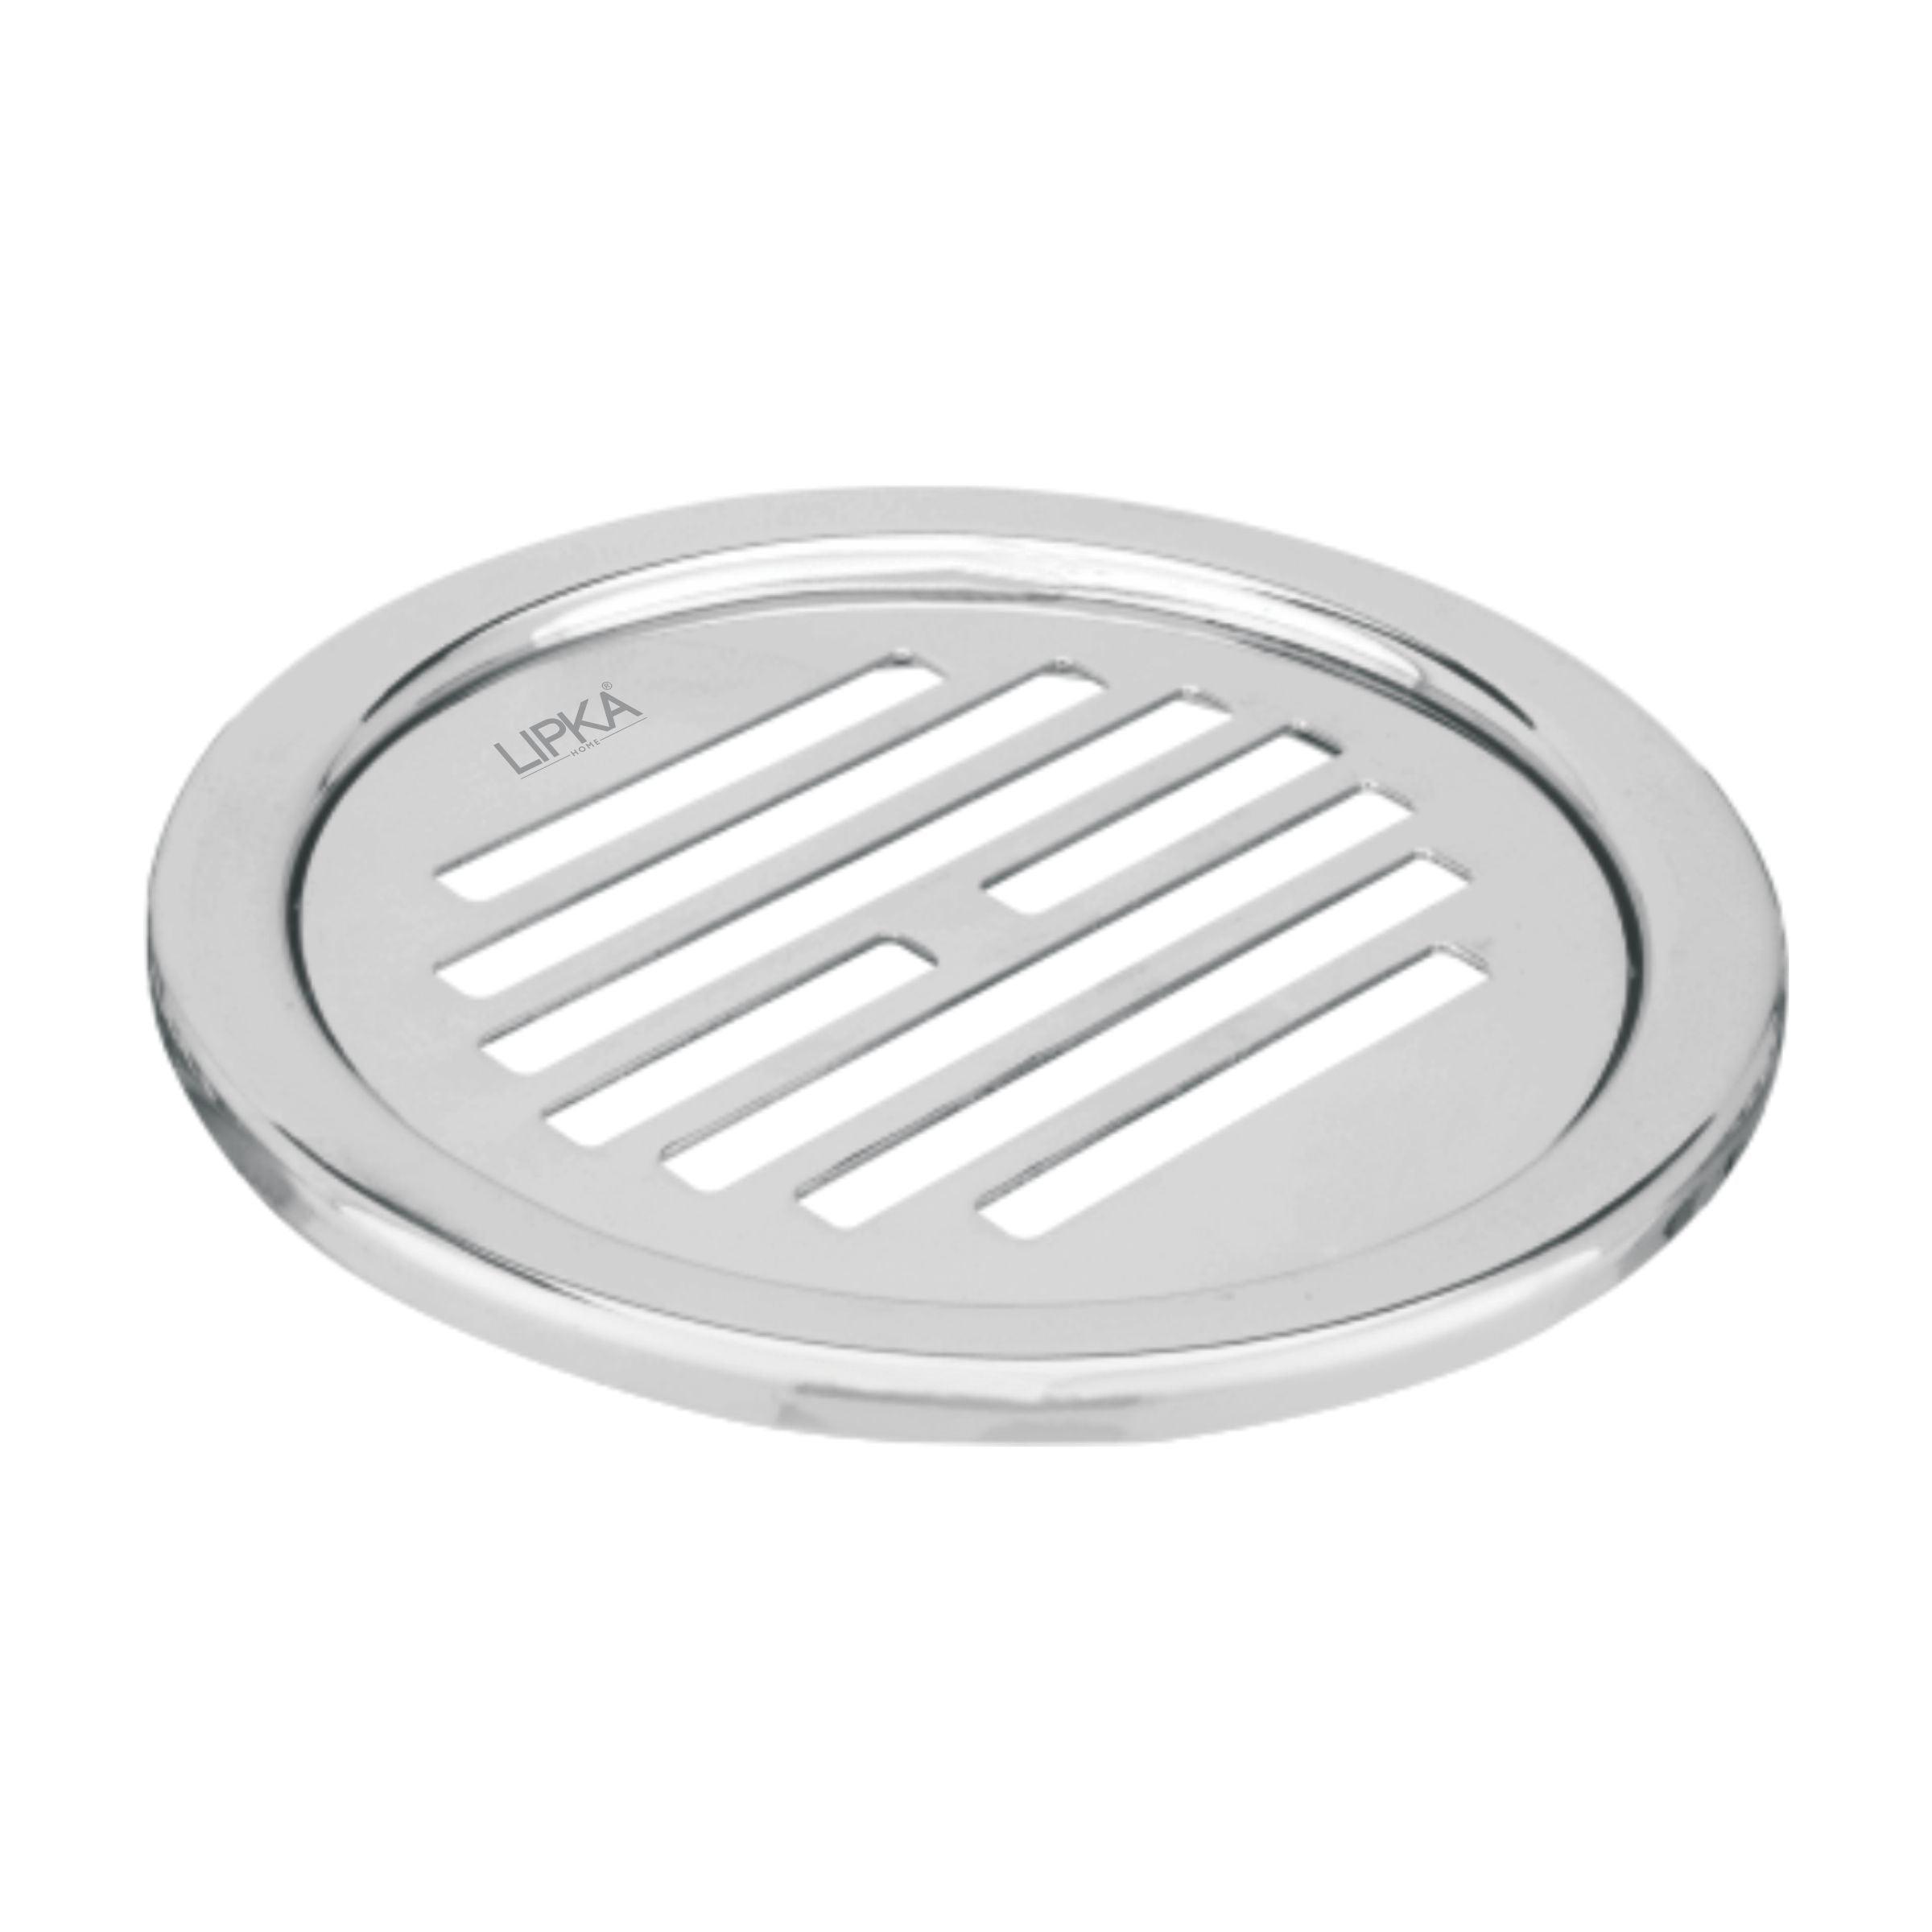 Eon Round Floor Drain with Golden Classic Jali (5 inches)